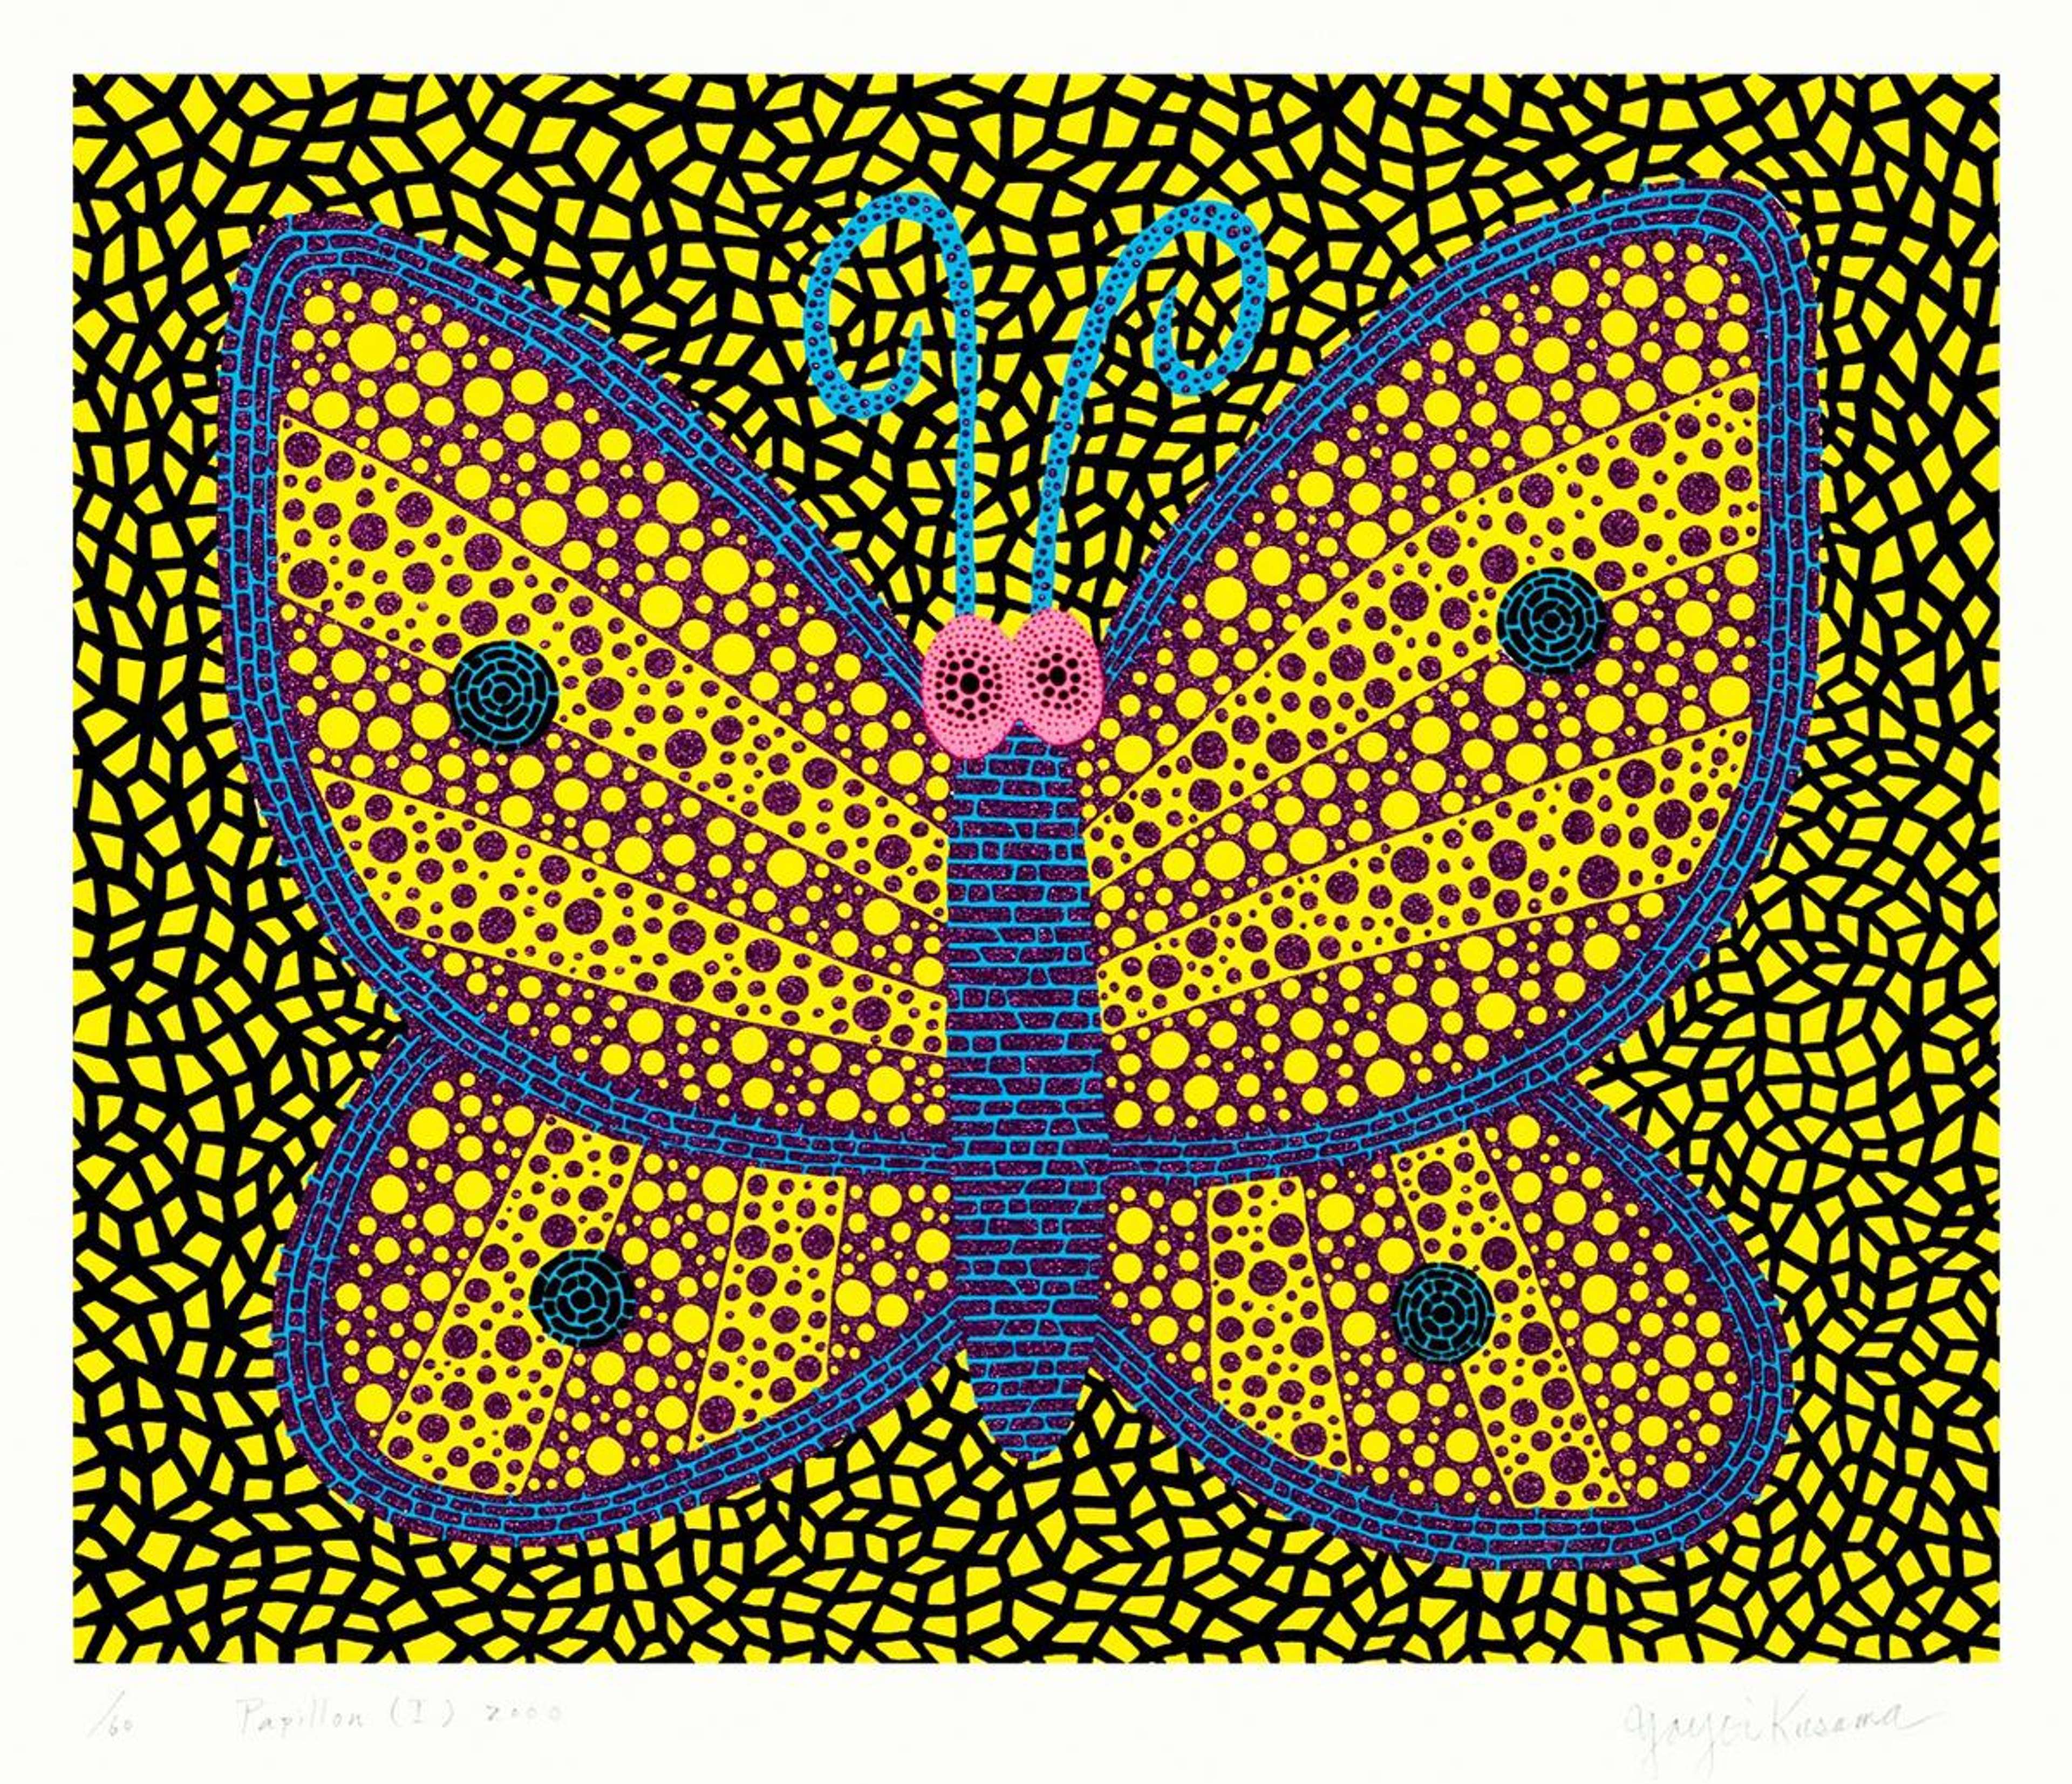 A screenprint depicting a butterfly against a yellow patterned background, with the wings and body of the butterfly outlined in blue